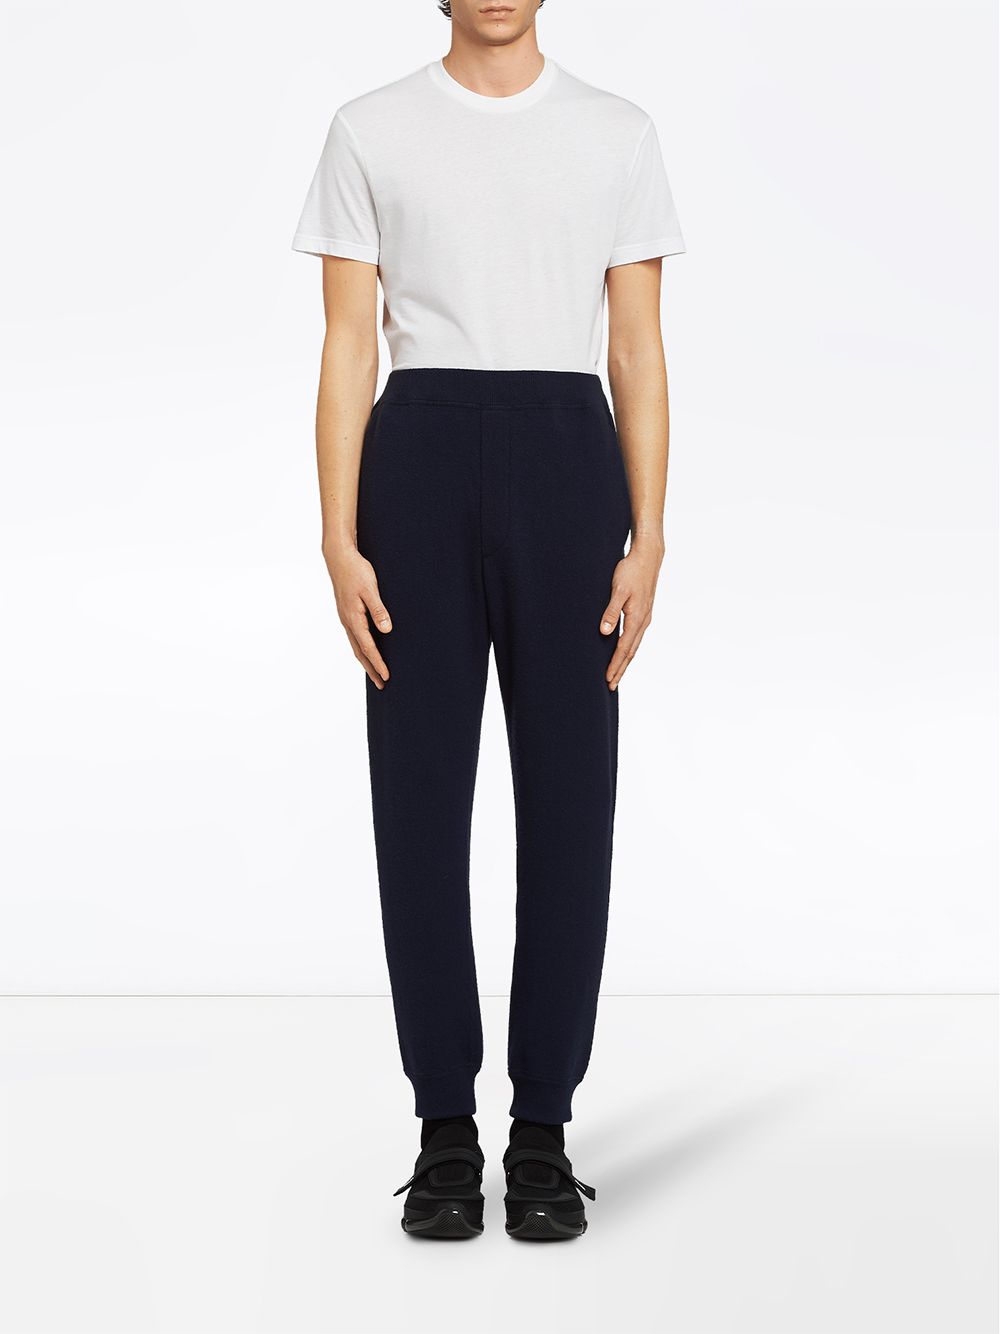 Shop Prada Wool and cashmere jogging pants with Express Delivery - FARFETCH